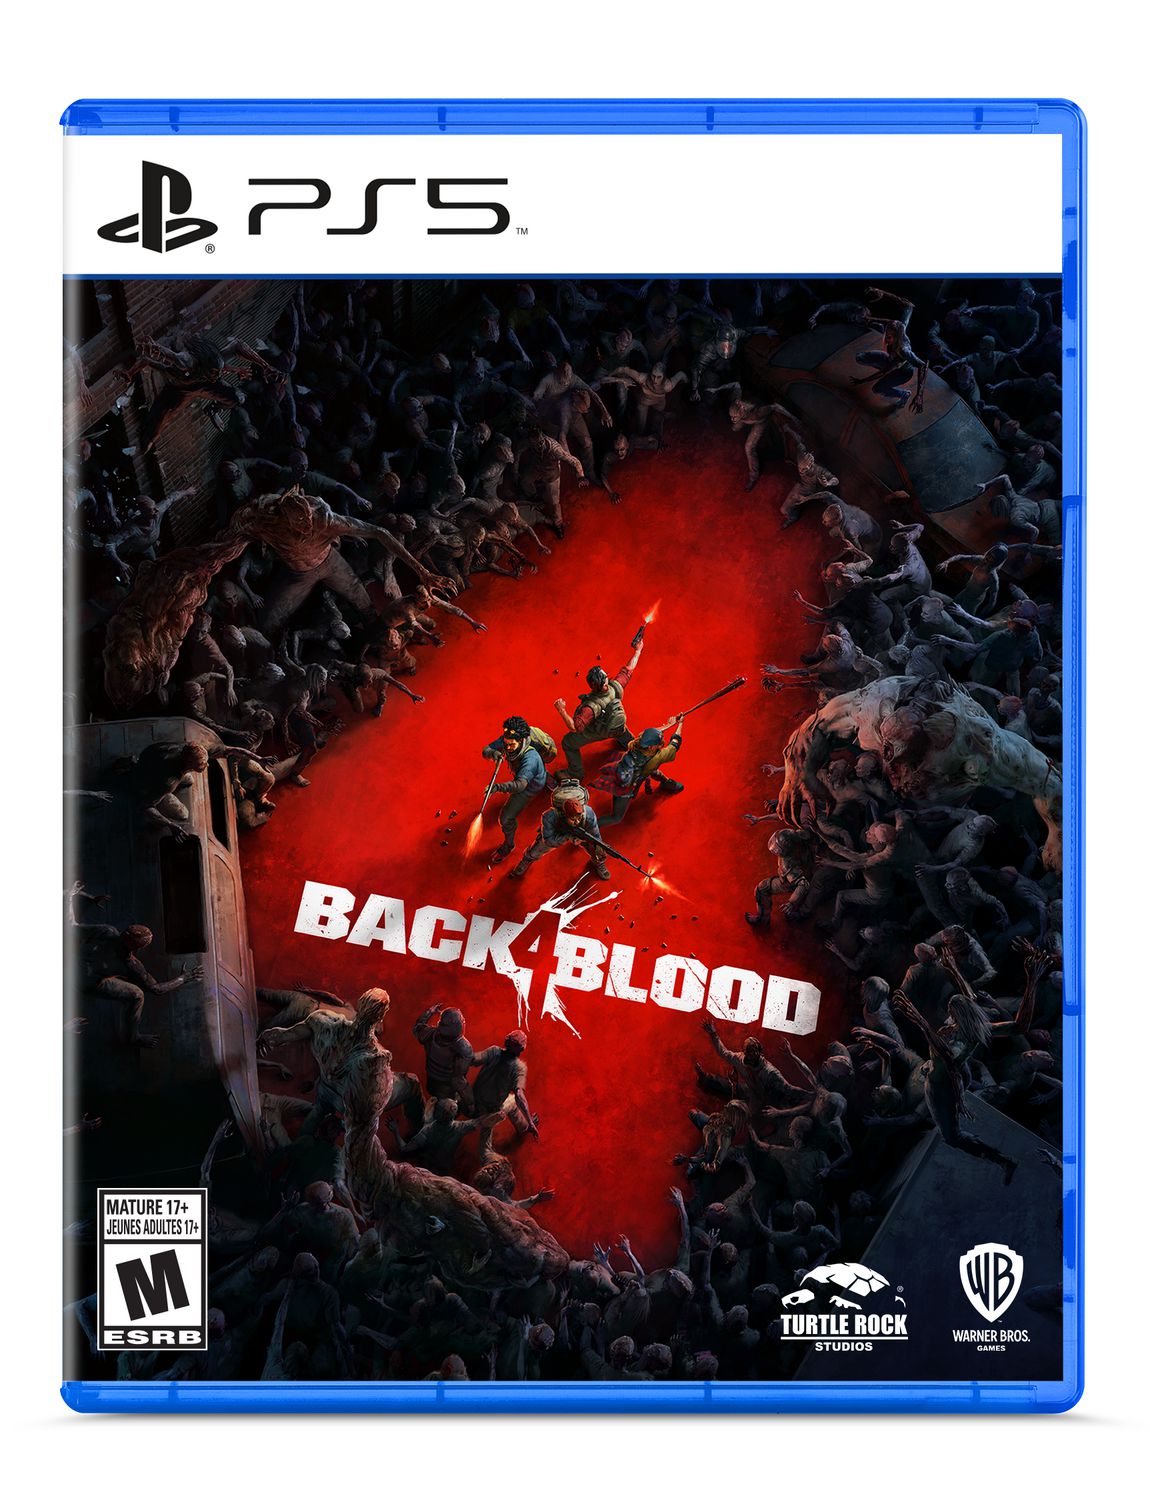 Back 4 Blood
French, Italian, German, Castilian Spanish, Latin American Spanish, Brazilian Portuguese, Polish, Russian, Korean, Japanese, Simplified Chinese, Traditional Chinese, Turkish, and Arabic
PS5, Xbox Series X|S, Steam, Epic, PS4 and Xbox One